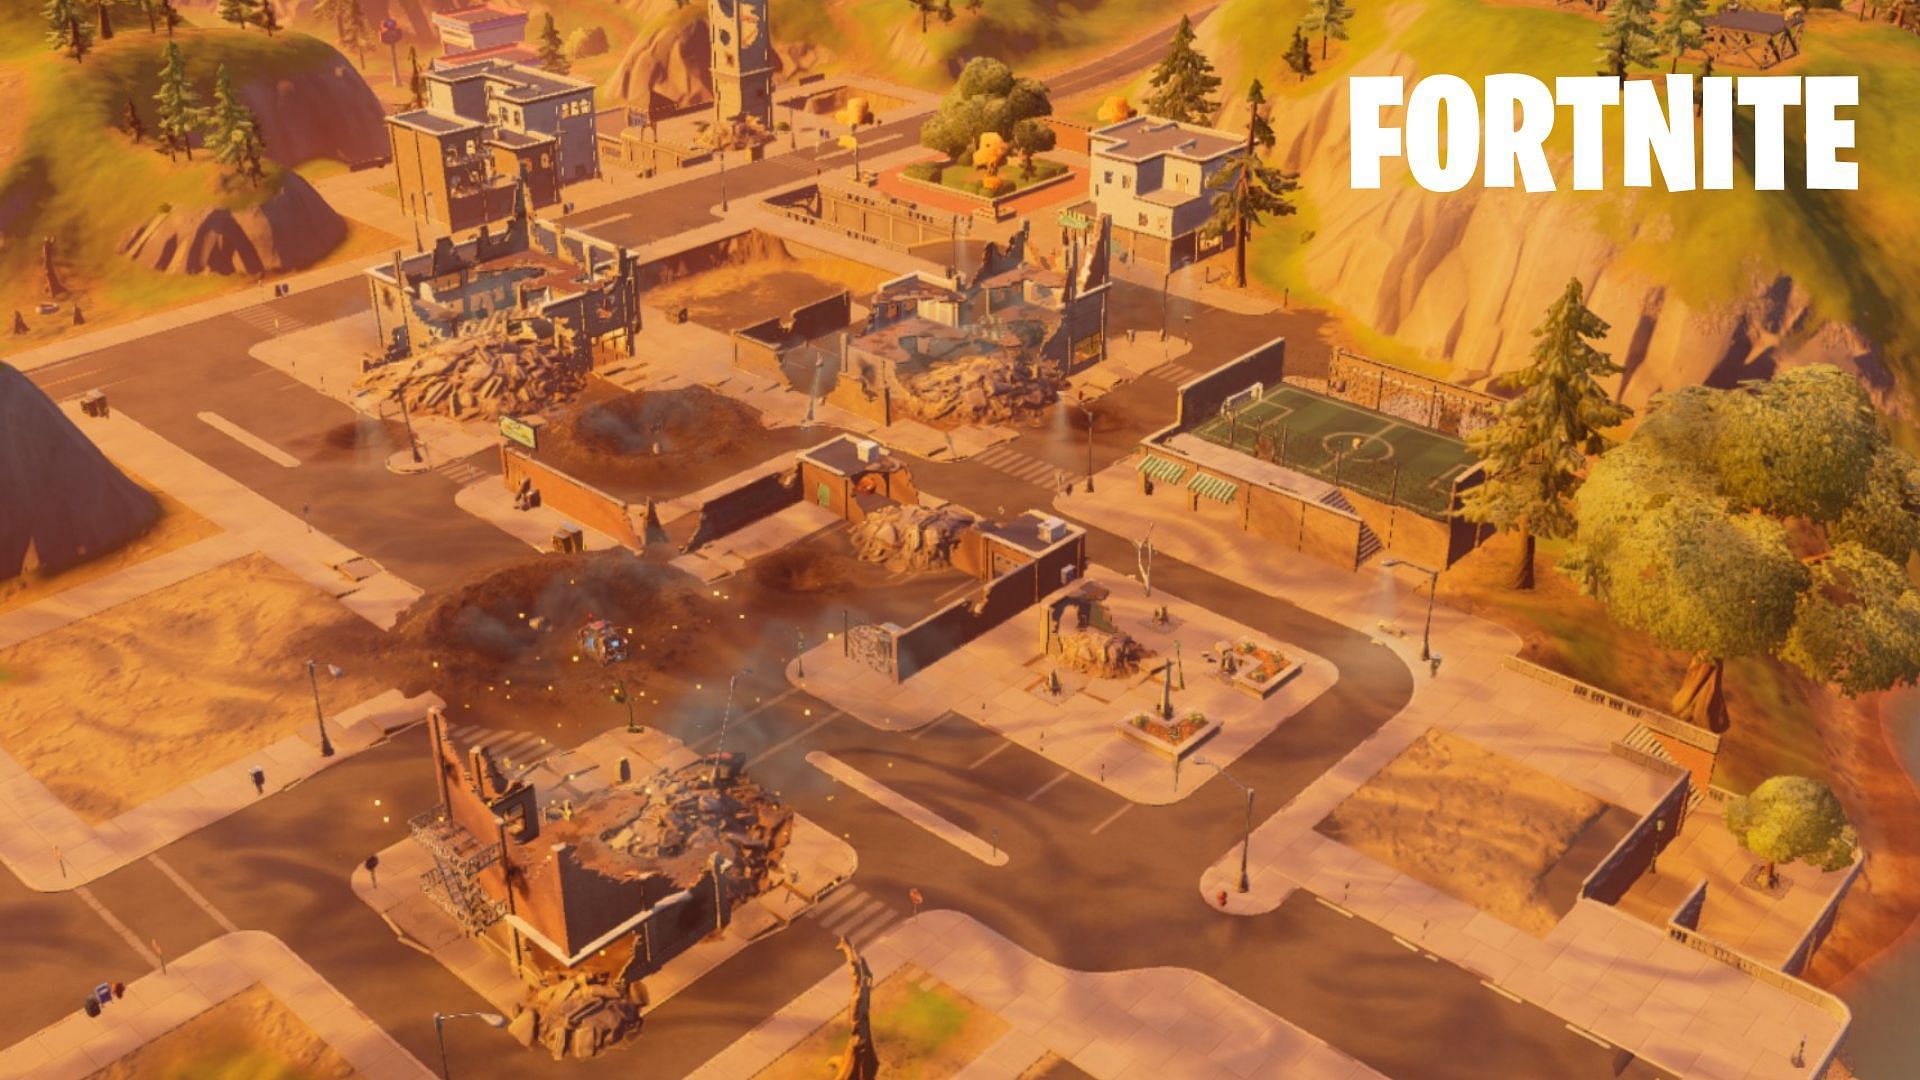 Fortnite update kicks off the destruction of Tilted Towers, again